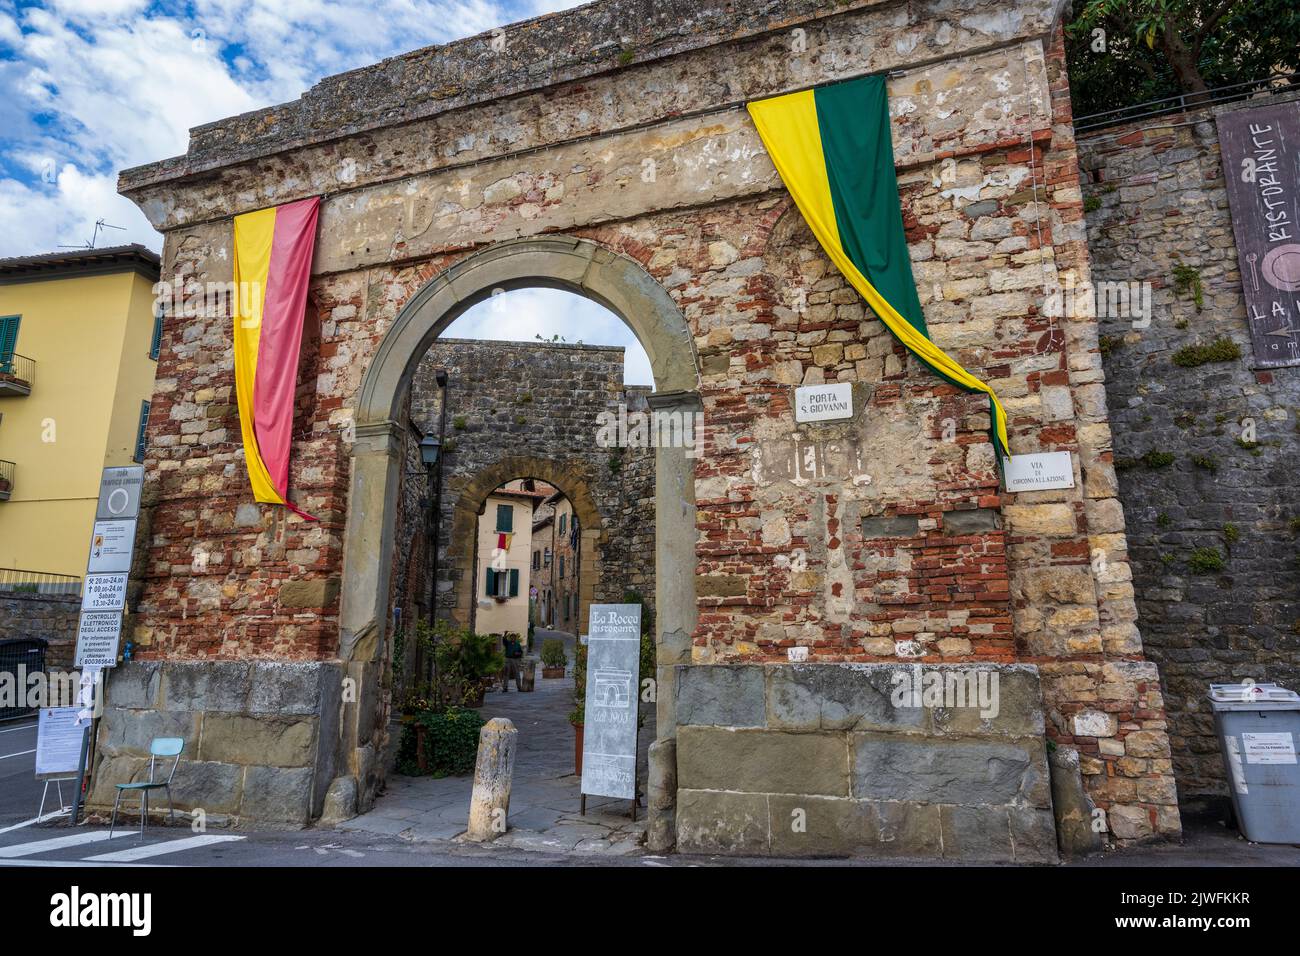 Exterior of Porta San Giovanni in the medieval hilltop town of Lucignano in the Val di Chiana in Tuscany, Italy Stock Photo